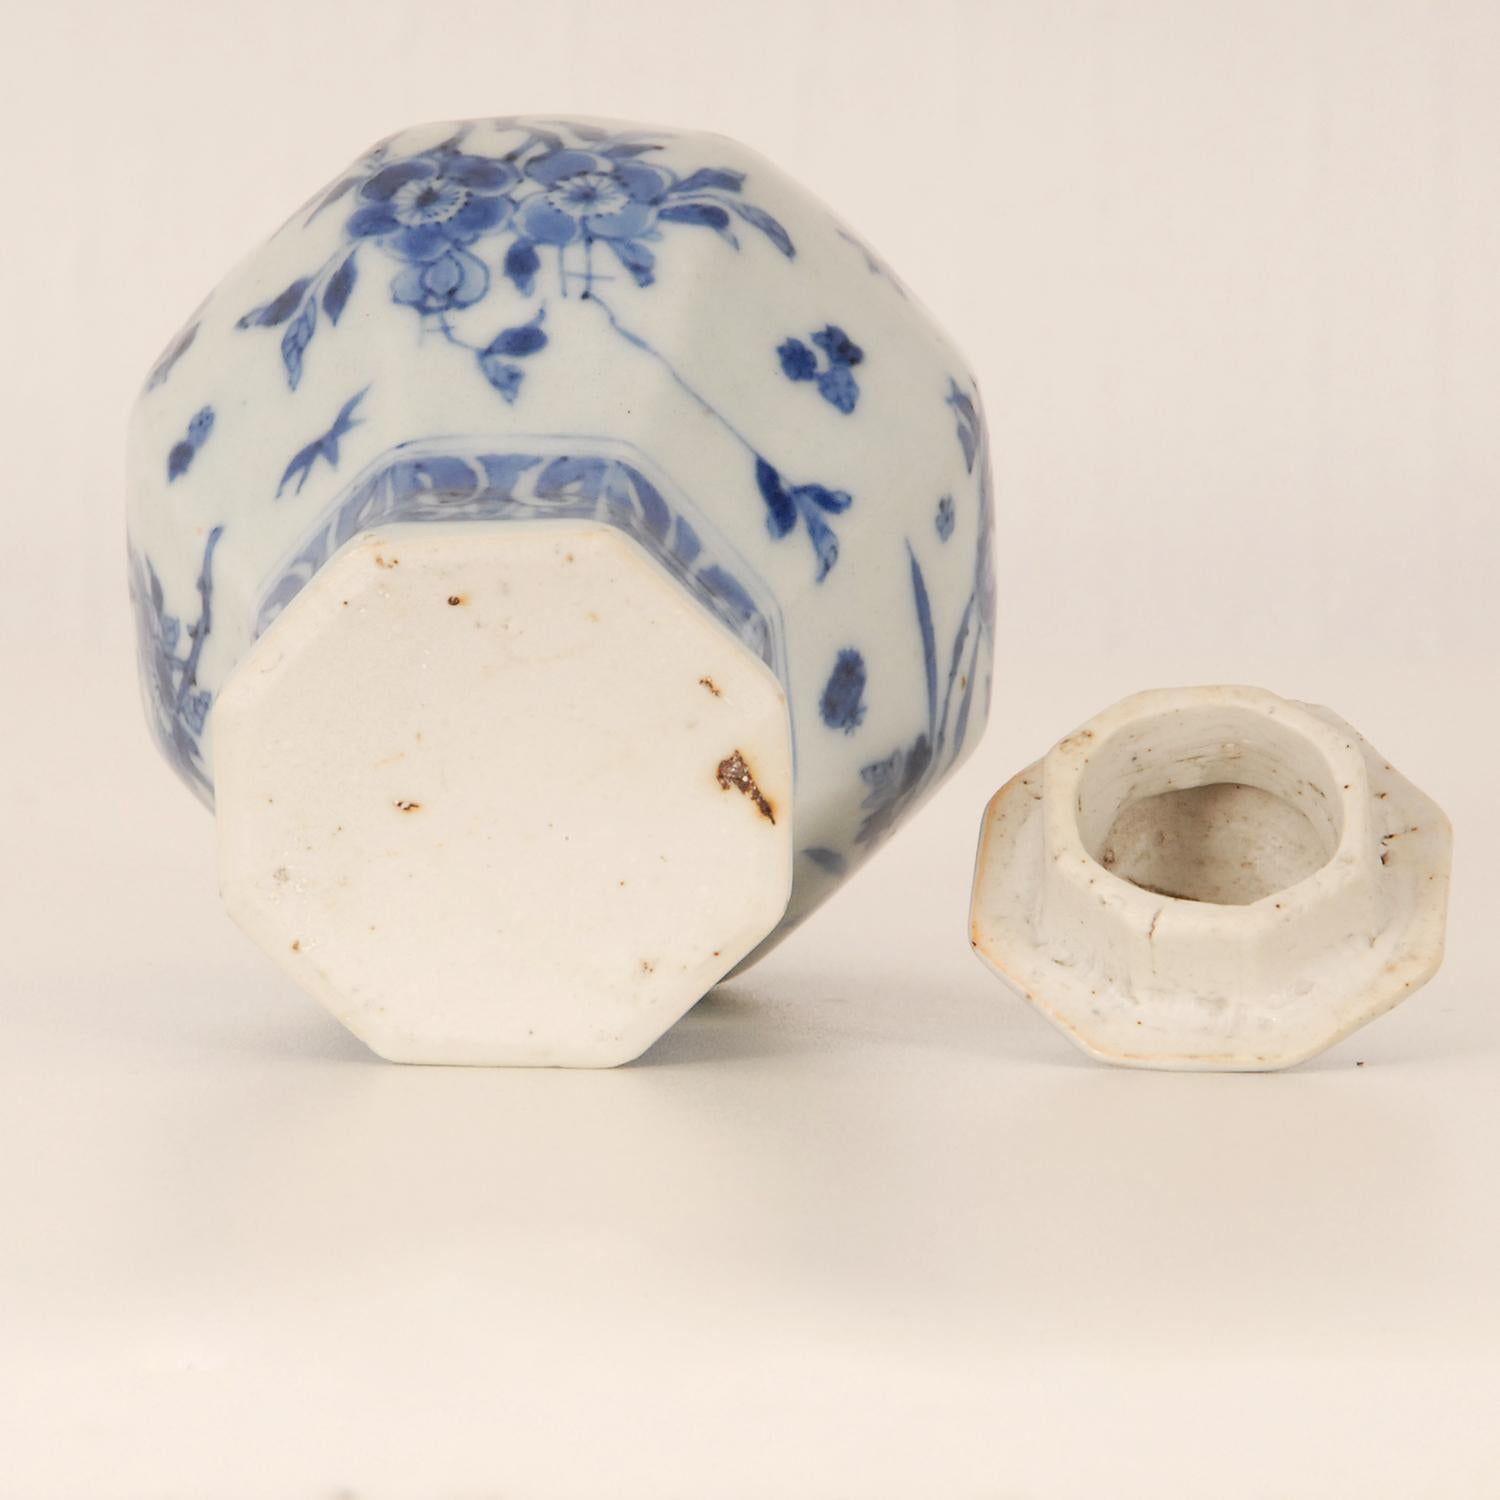 17th century Chinese Ming Porcelain Ceramic Blue and White Vase Covered For Sale 3